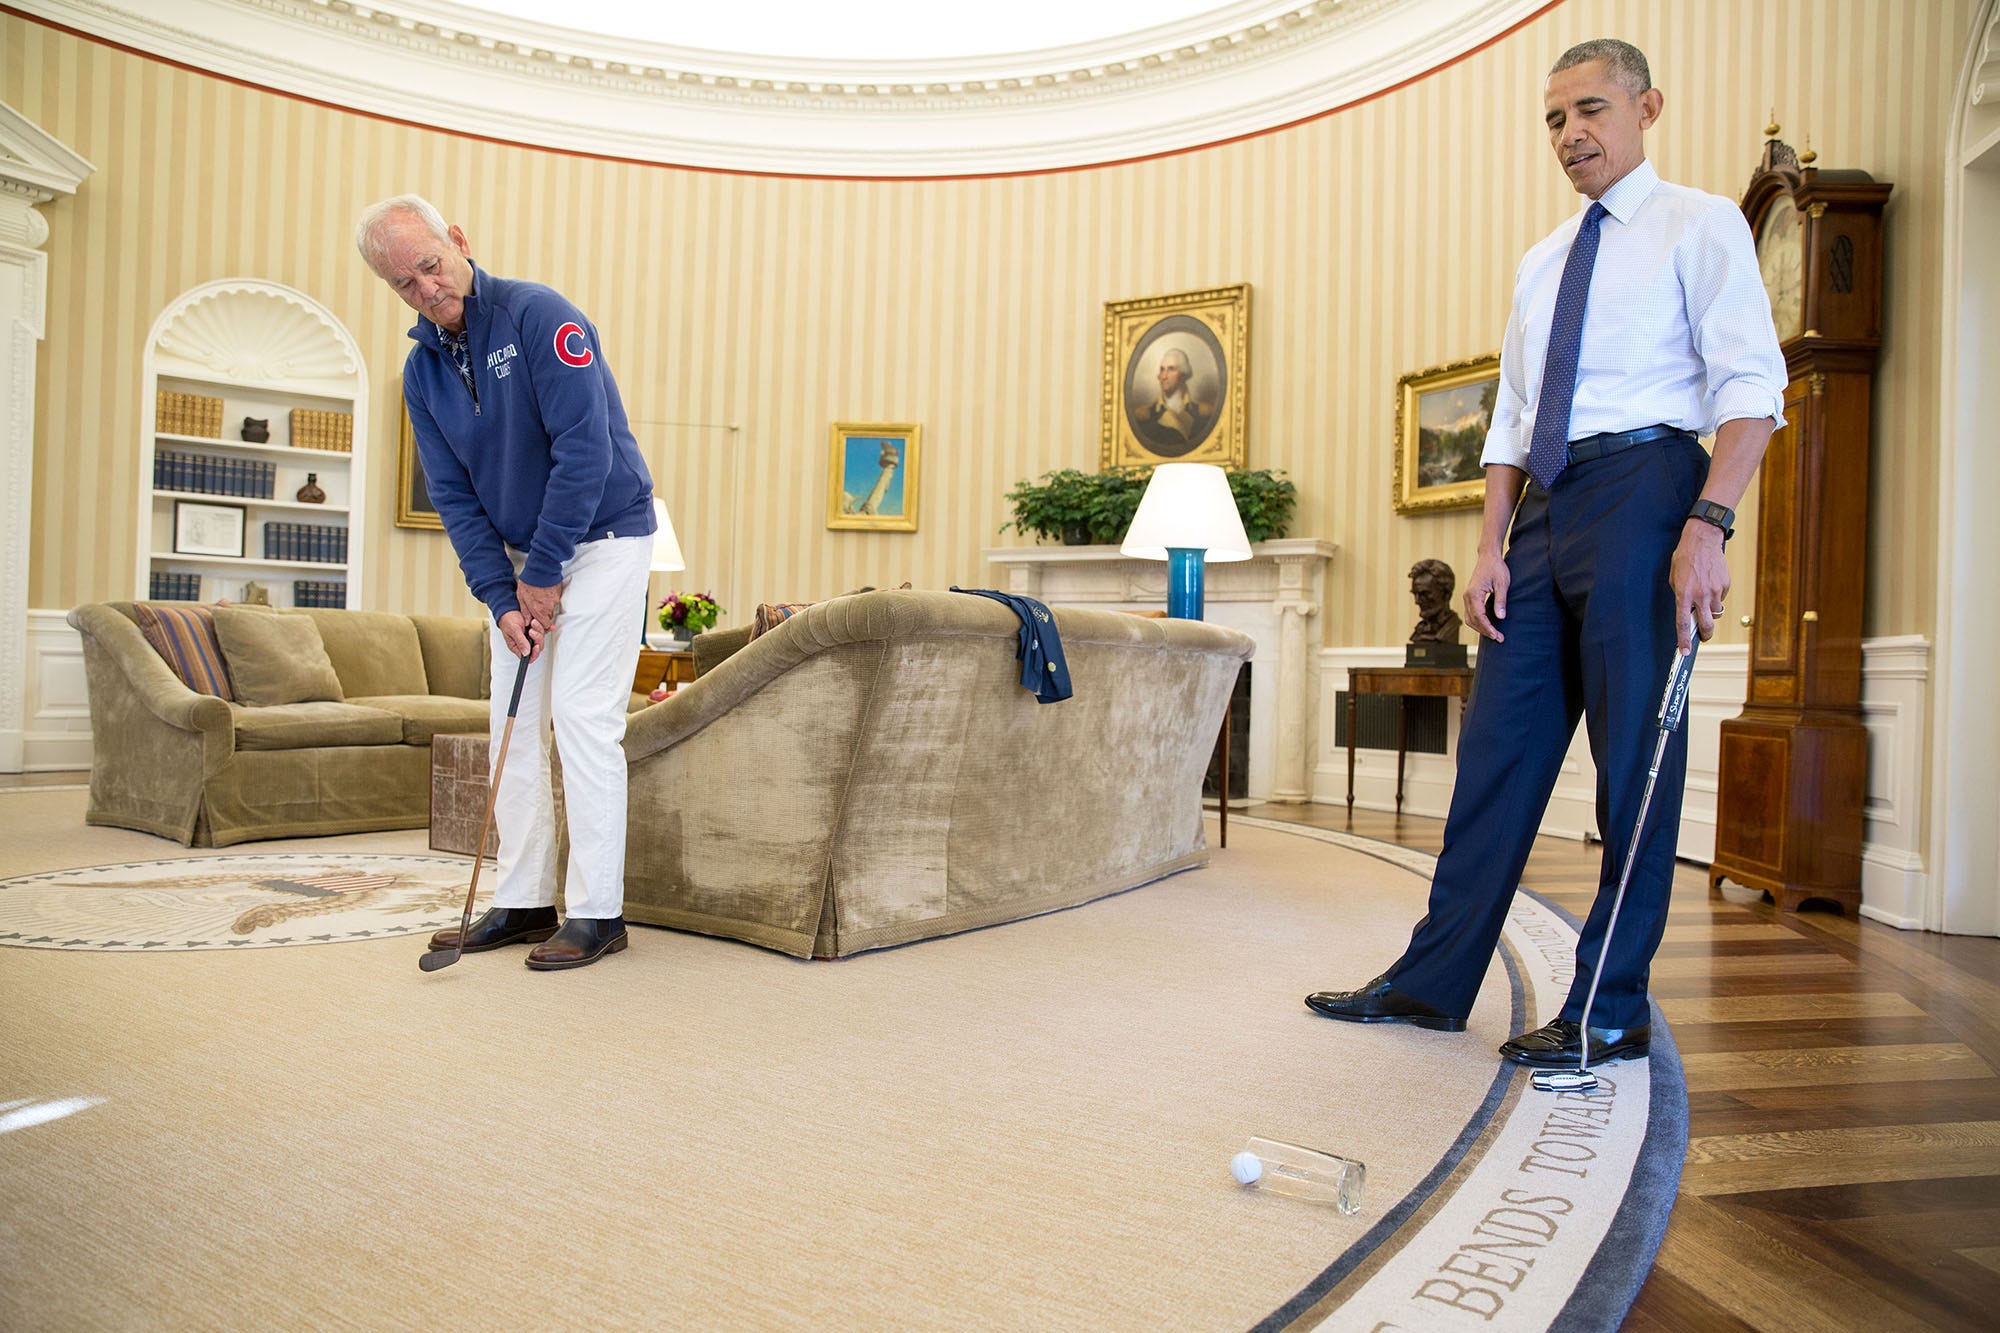 Oct. 21, 2016 “Bill Murray stopped by the White House to be honored as the recipient of the Mark Twain Prize for American Humor. When the President opened the door to the Oval Office, he laughed that Bill was in full Chicago Cubs regalia just before the Cubs were to begin the World Series. After the presentation, Murray demonstrated his prowess in putting, ‘sinking’ several putts into a White House drinking glass, all while doing a public service announcement to sign up for the Affordable Care Act.” (Official White House Photo by Pete Souza)